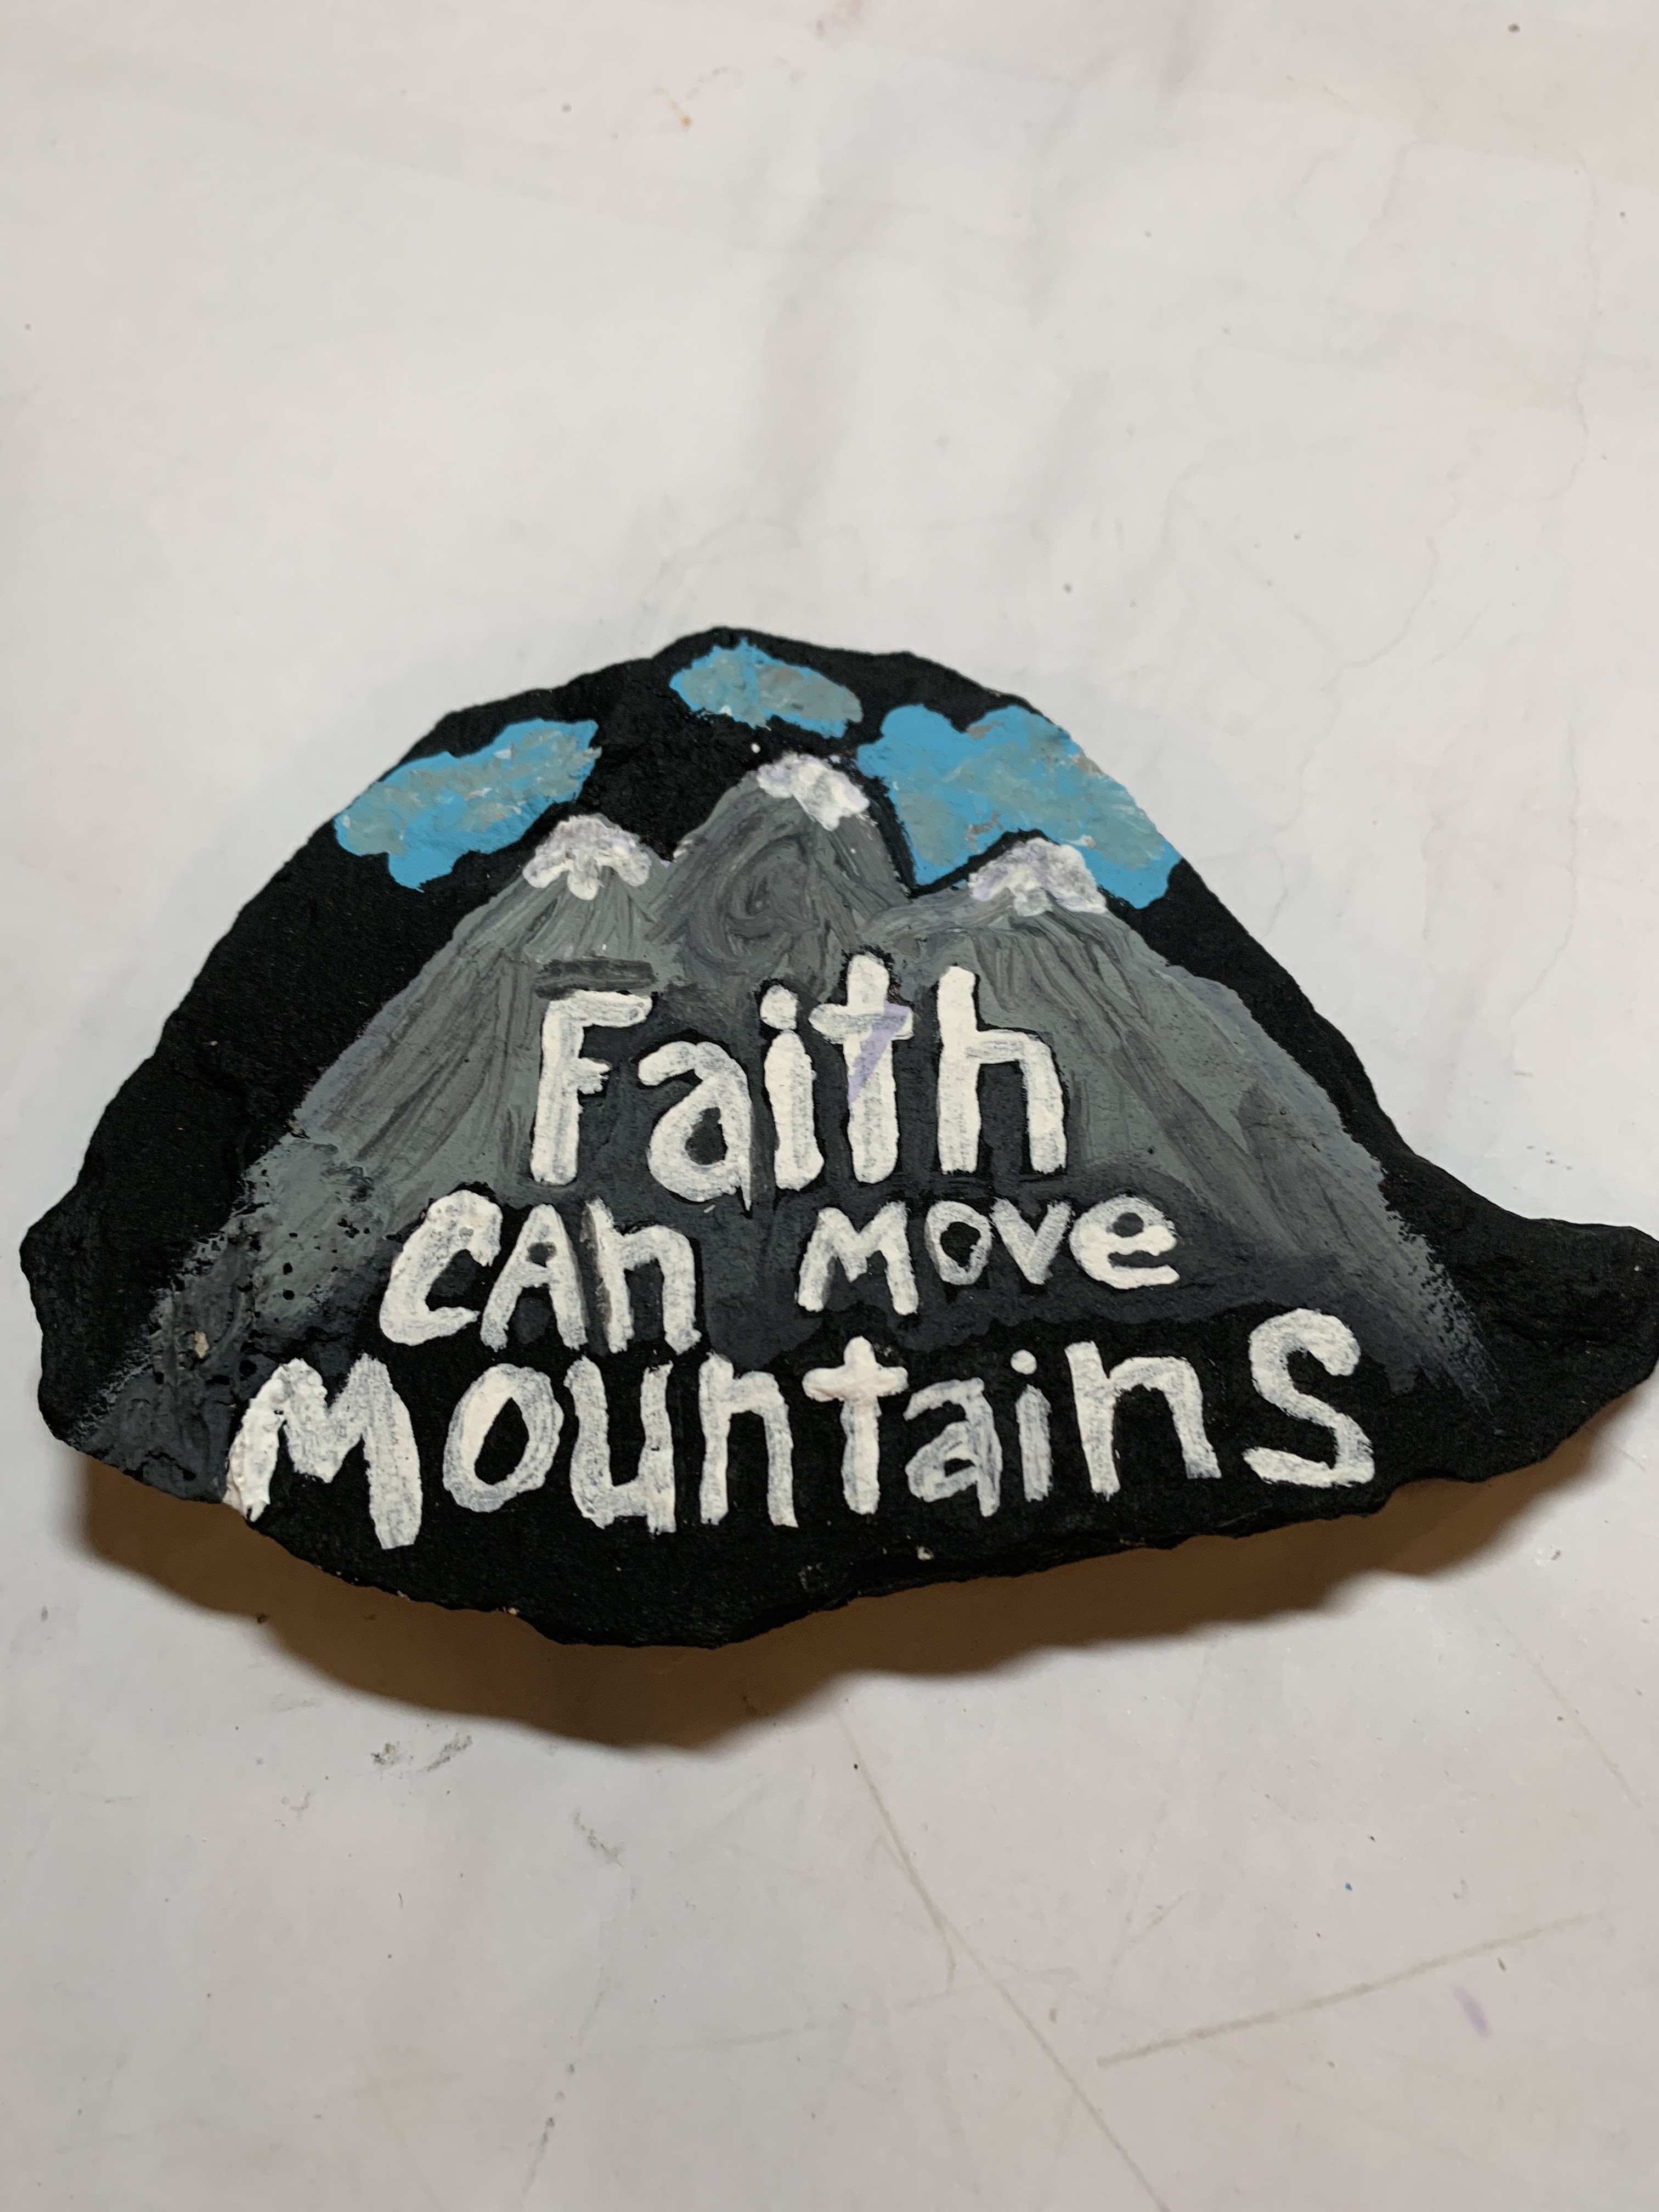 Simply Creative Rock Painting for Beginners